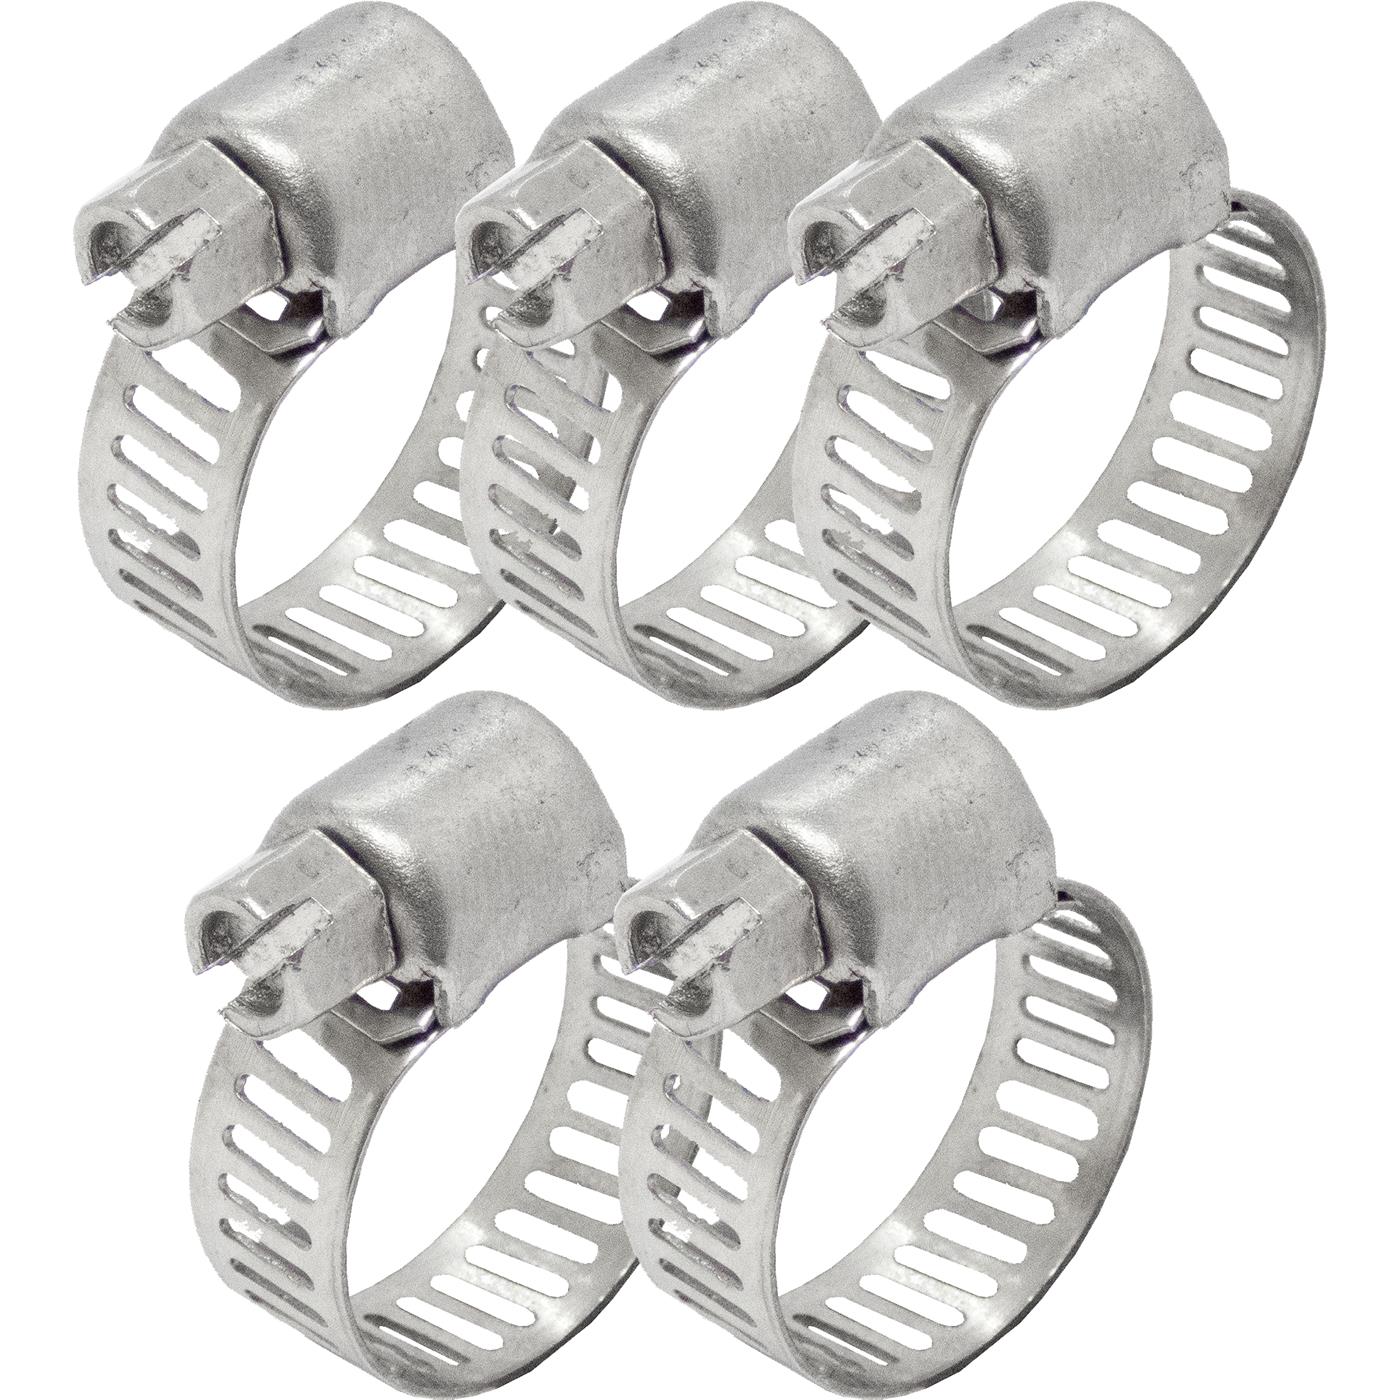 5x Hose clamp Stainless steel V2A 201 13-19mm Pipe clamp Hose clamp